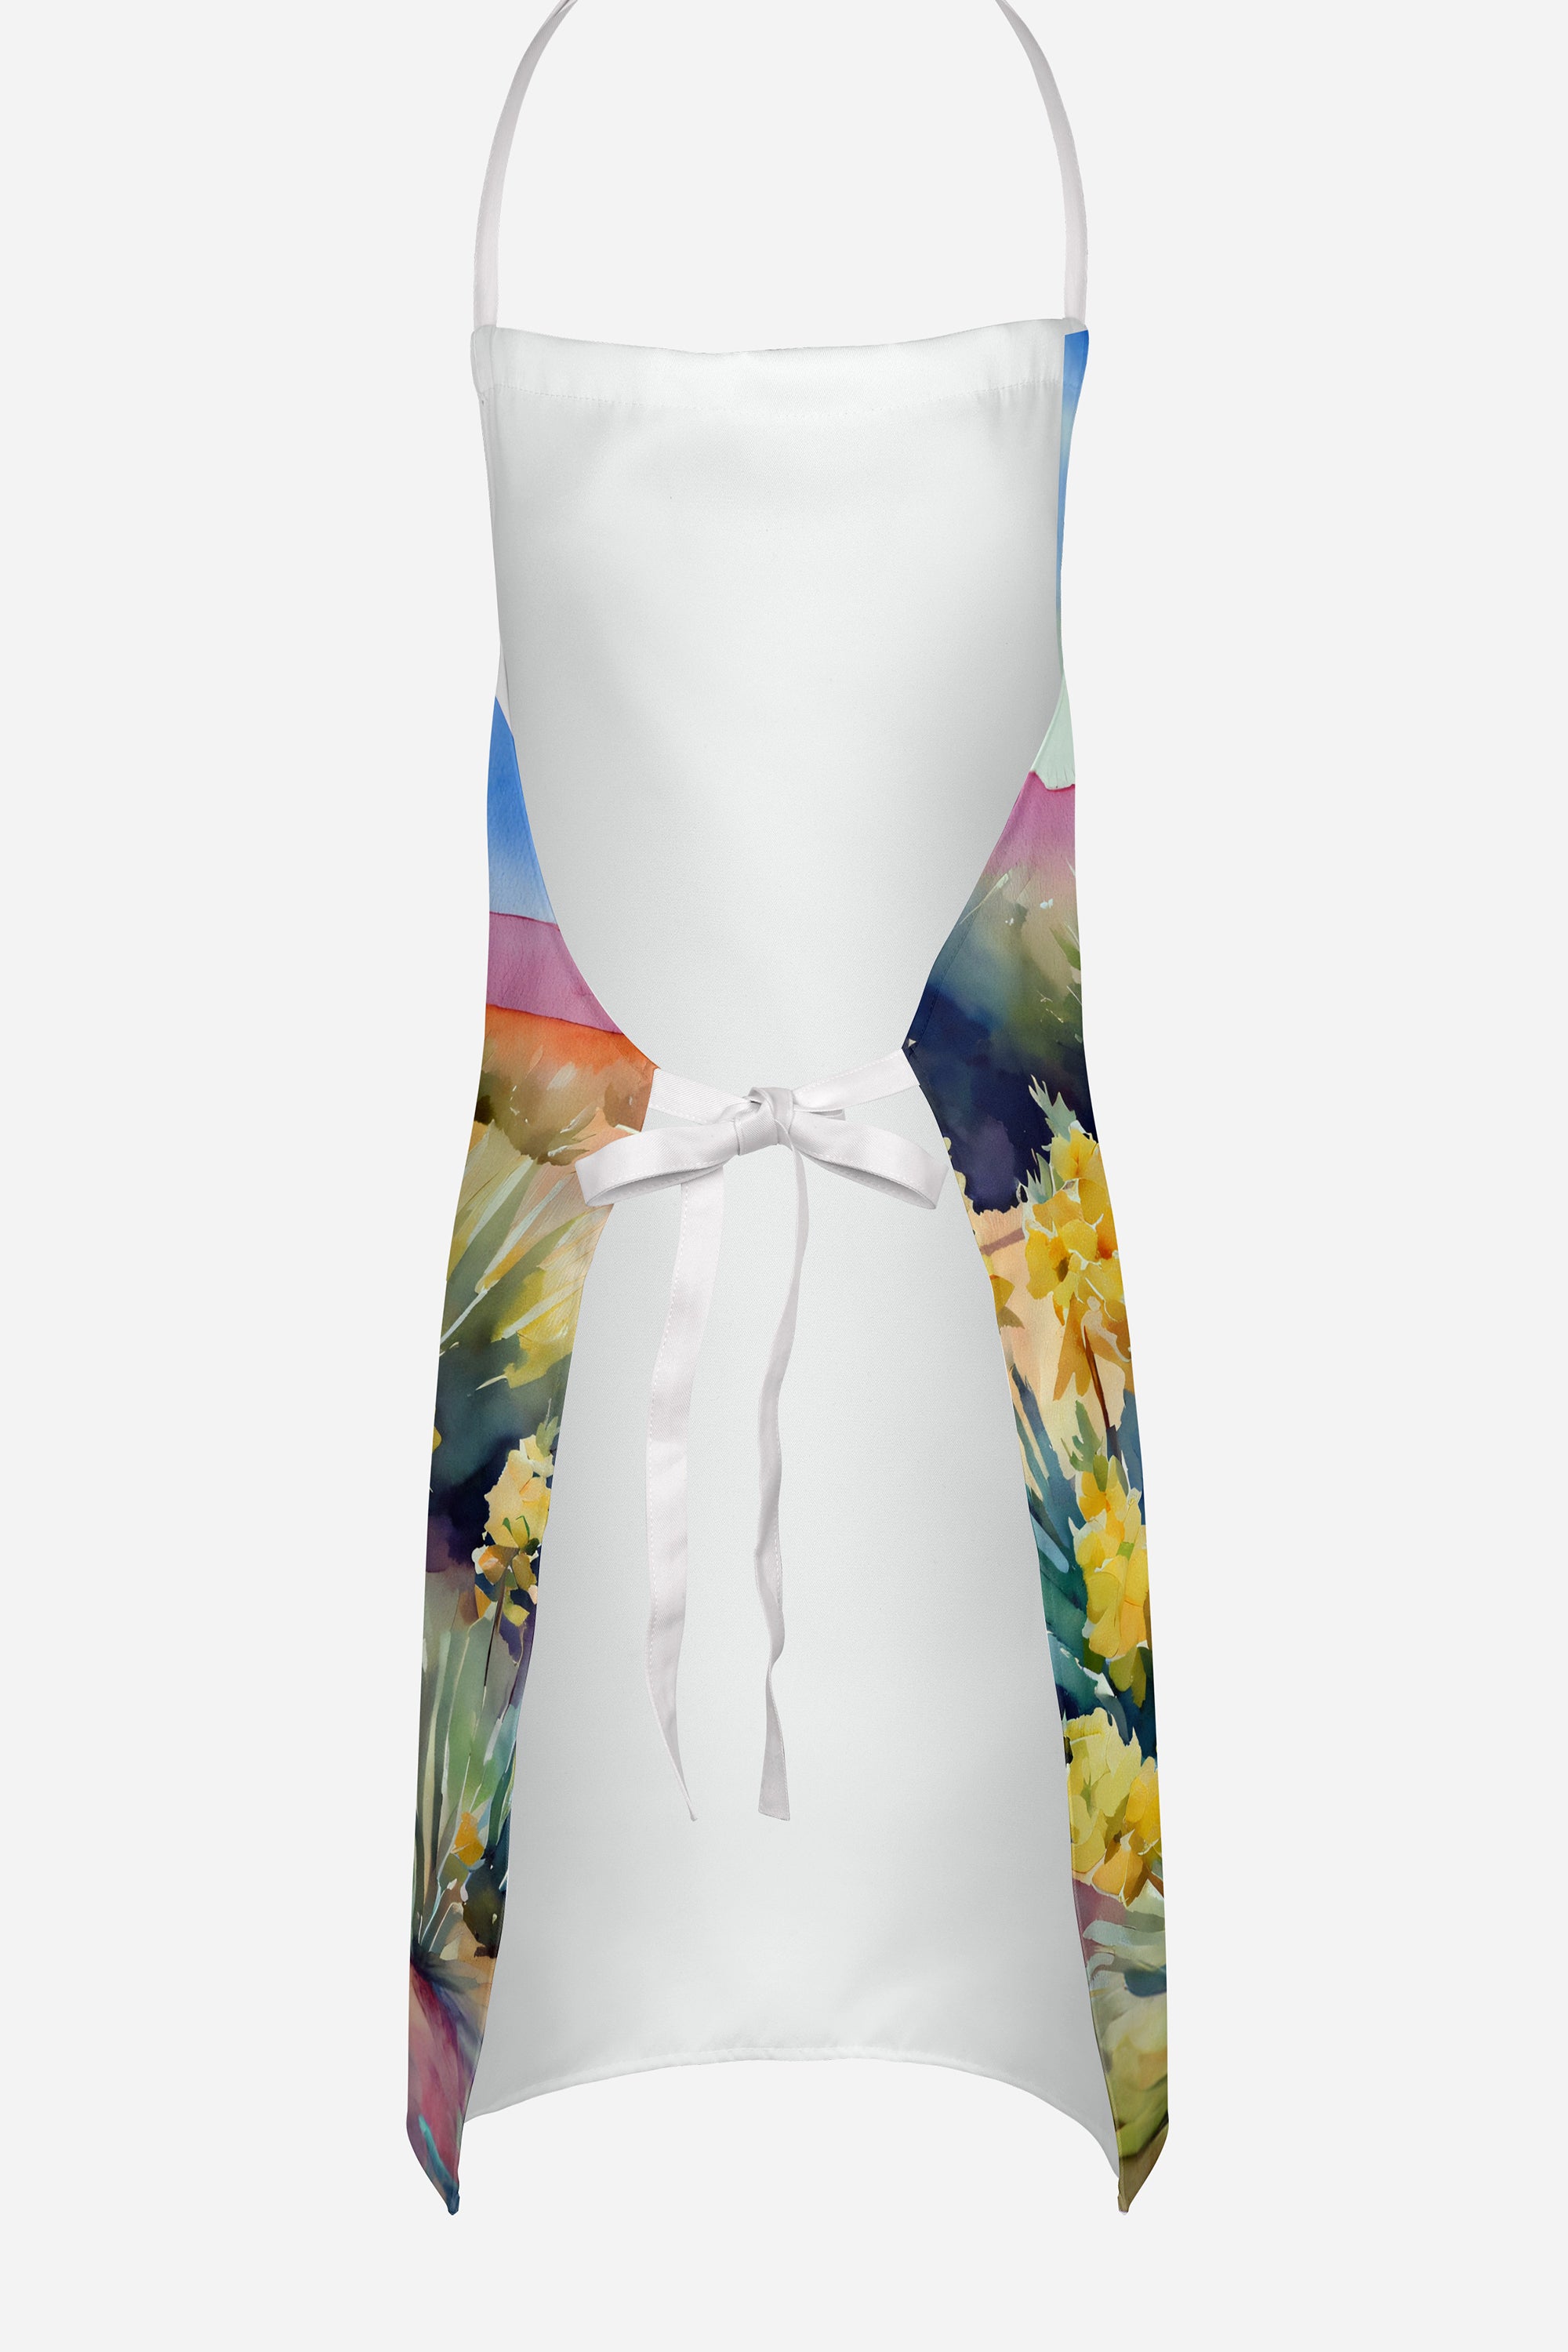 New Mexico Yucca Flower in Watercolor Apron